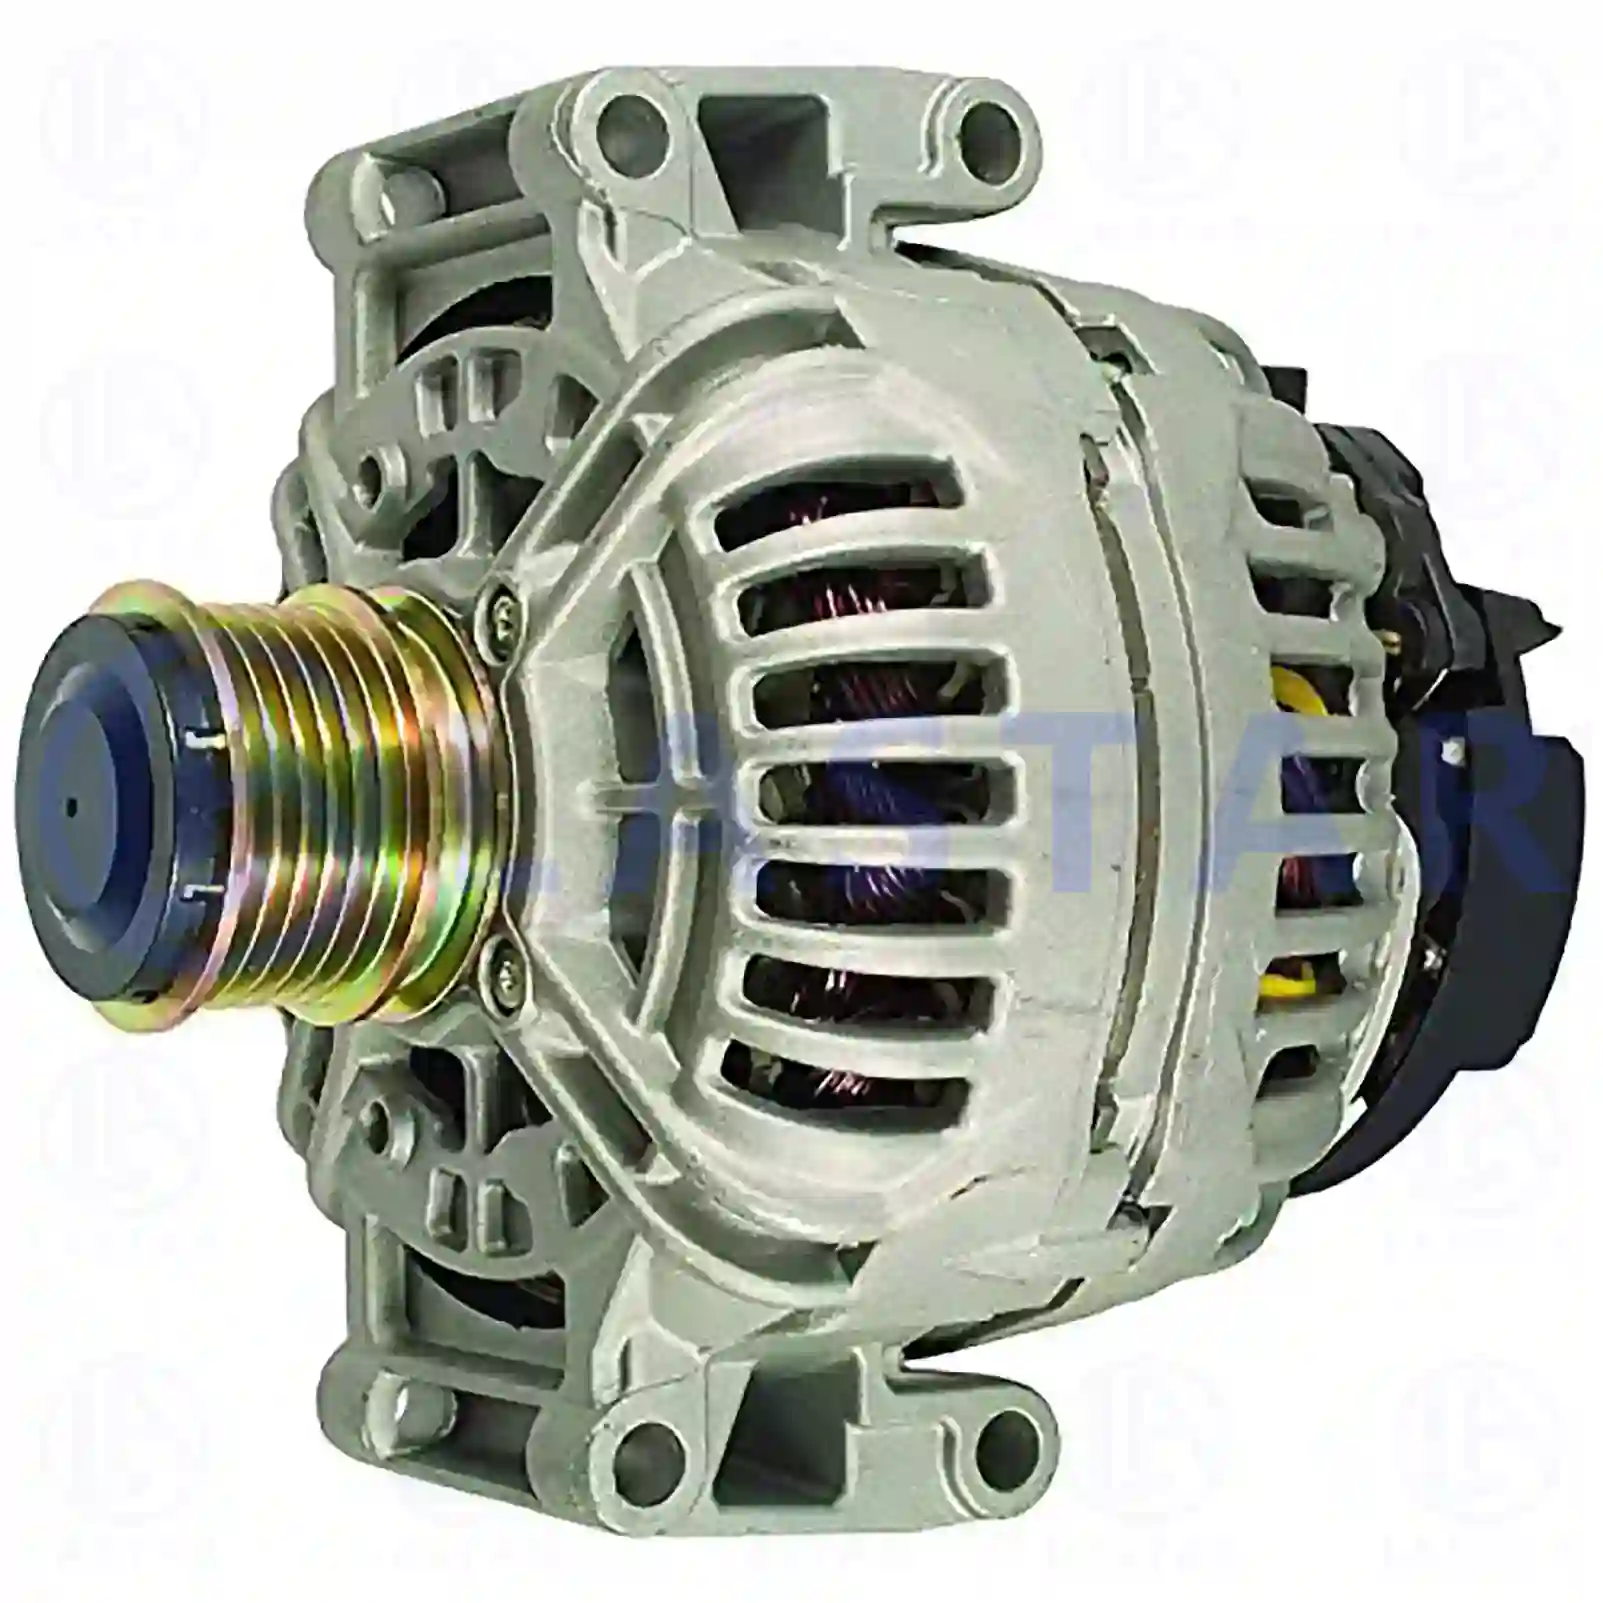 Alternator Alternator, without pulley, la no: 77711592 ,  oem no:5103886AA, 5134204AA, 5134204AB, 0101545902, 0101549602, 0111540902, 0121542402, 0121545402, 0131541502, 0101545902, 0101549602, 0121545402 Lastar Spare Part | Truck Spare Parts, Auotomotive Spare Parts